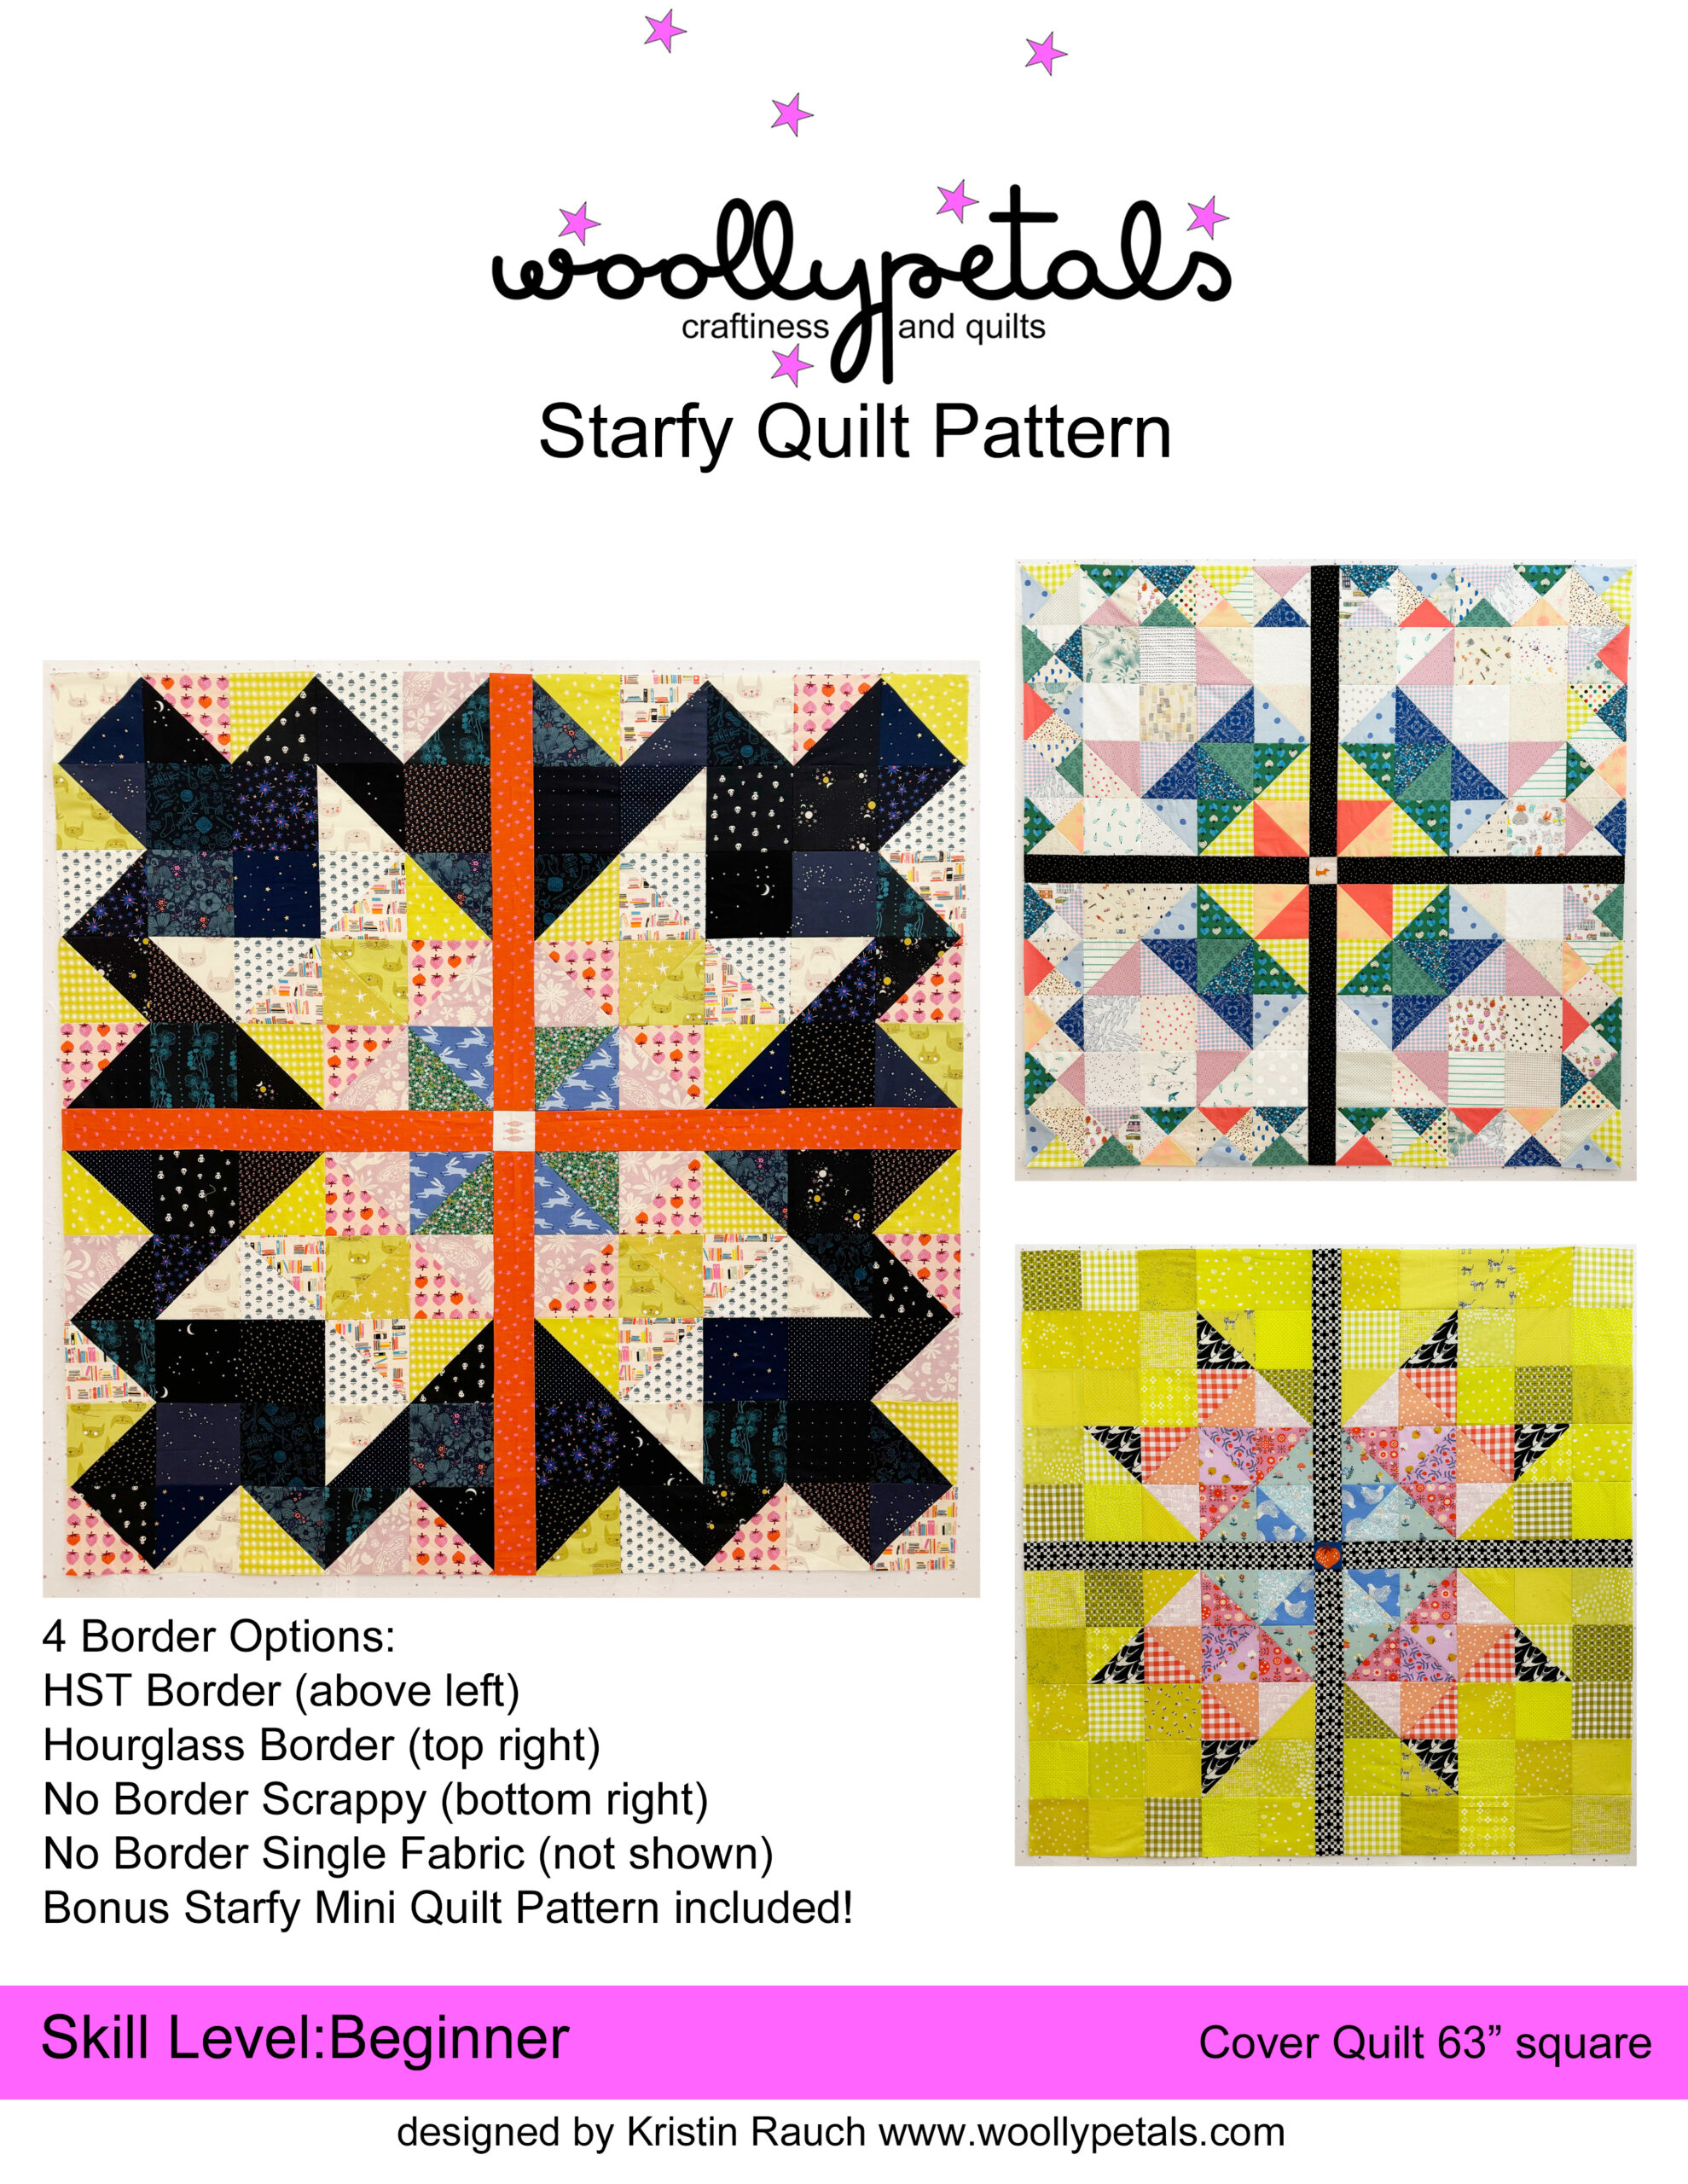 Cover Image for the woollypetals Starfy Quilt